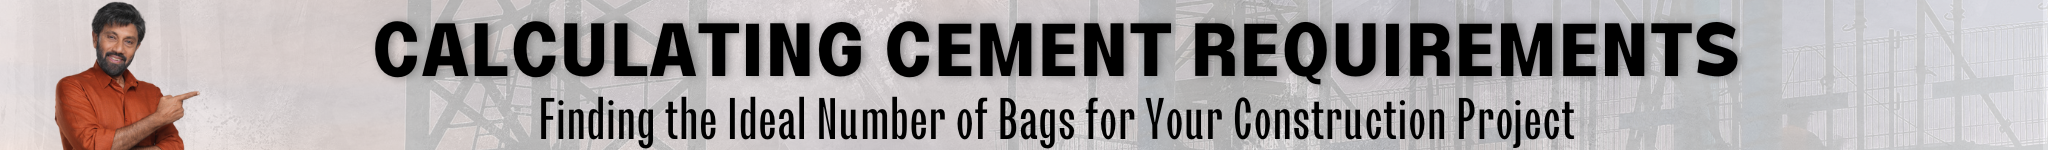 Cement bags calculation